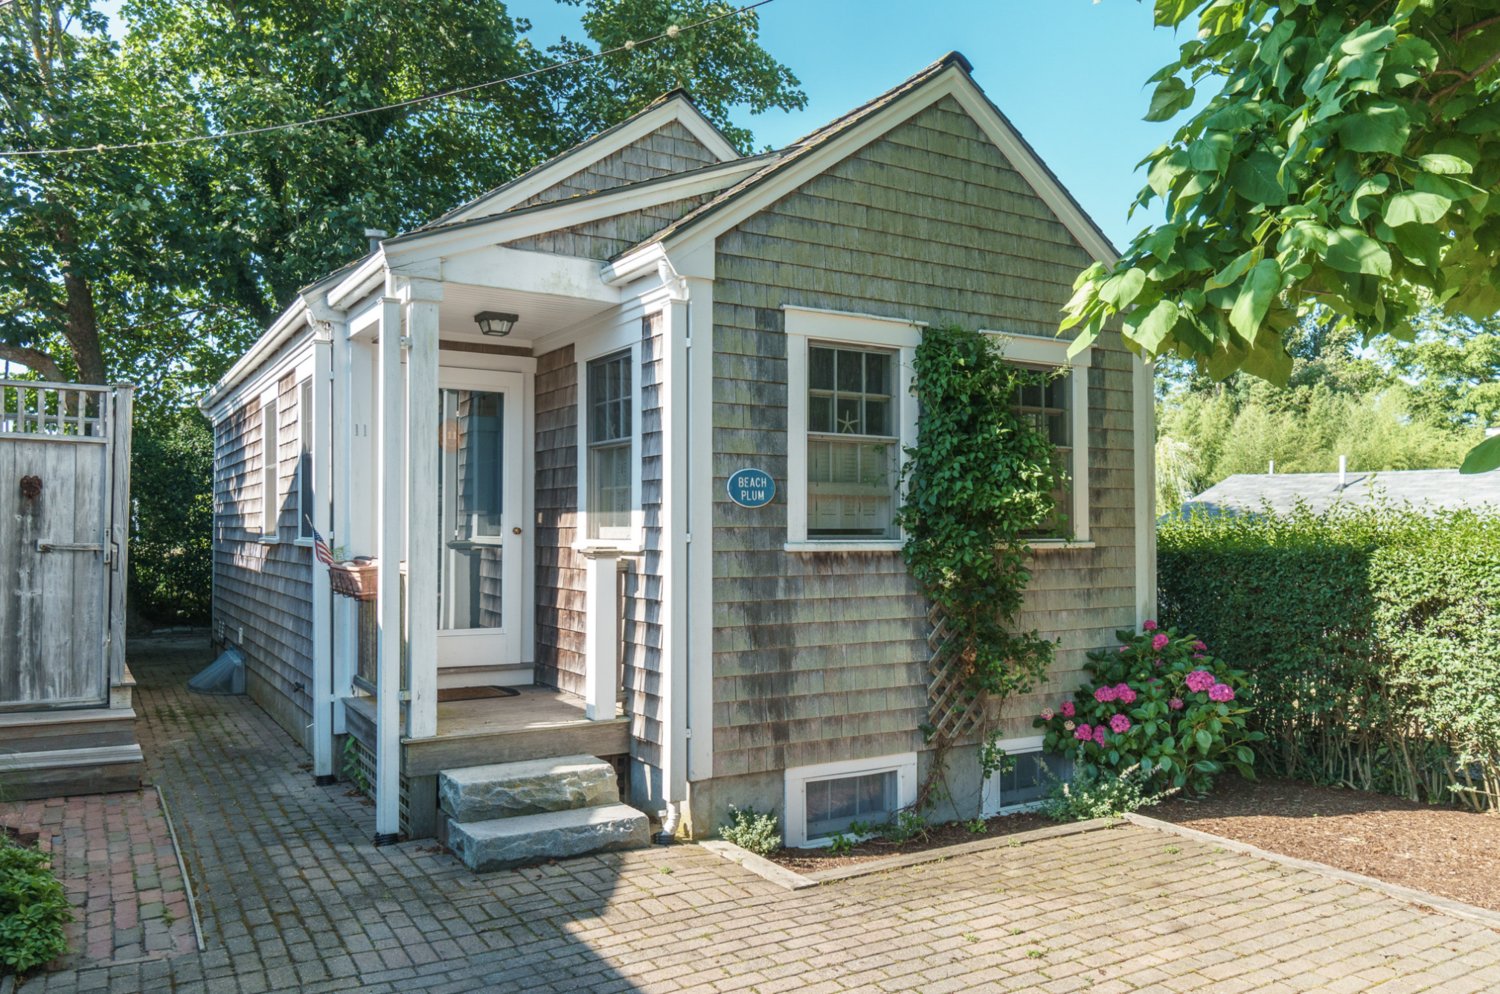 If a quaint Nantucket experience on a quiet downtown street is what you seek, look no further than this two-bedroom, two-bathroom property in the heart of Nantucket’s historic district.